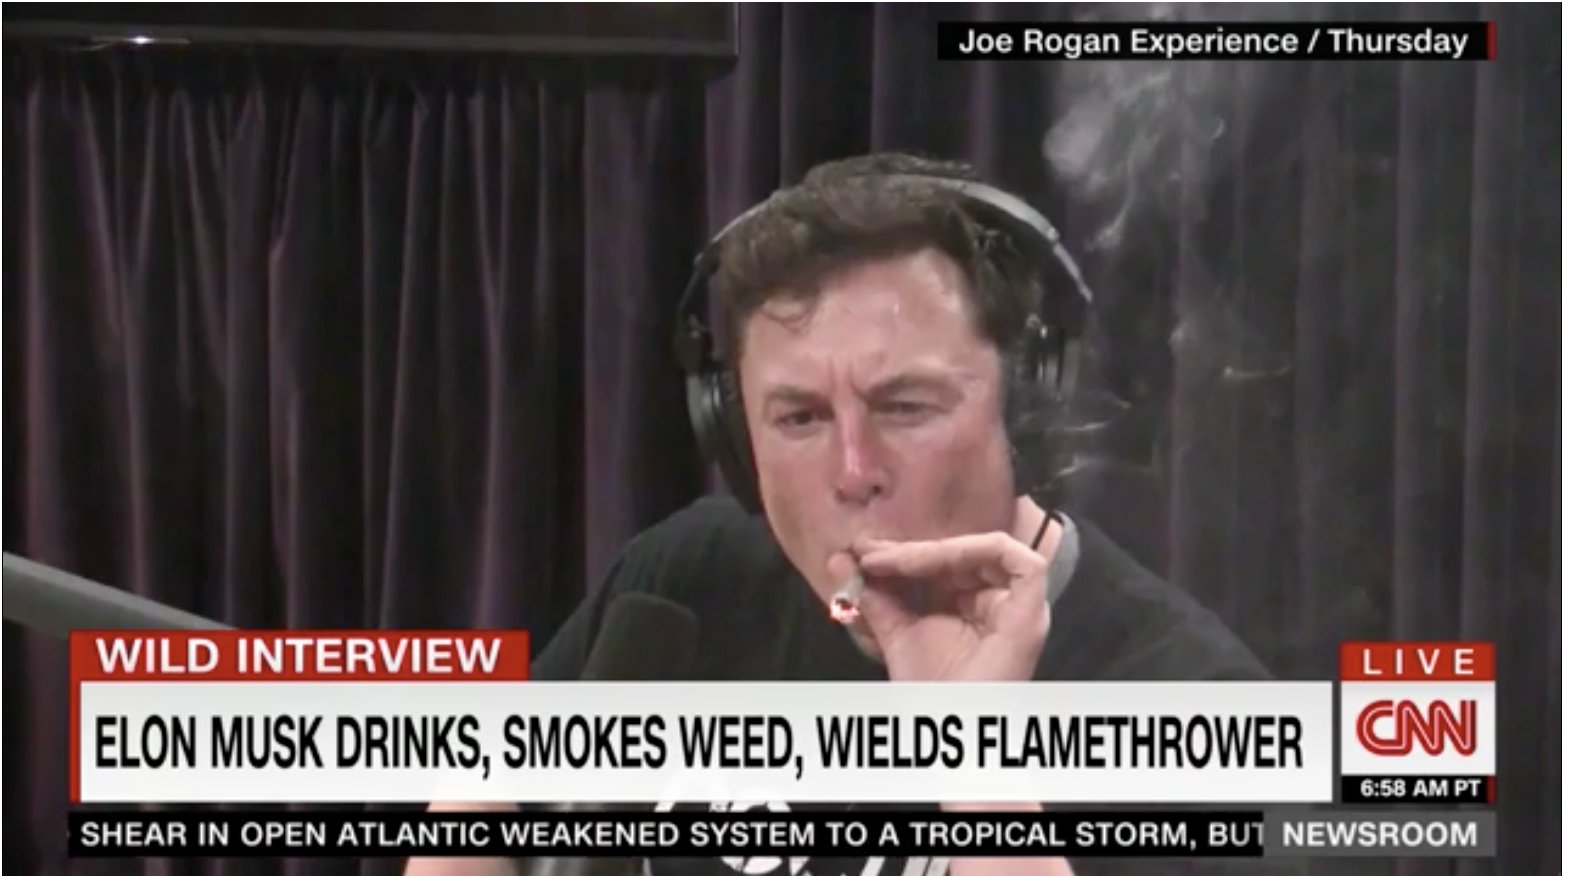 Weed, whiskey, Tesla and a flamethrower: Elon Musk meets Joe Rogan – Elon Musk apparently smoked weed during a live interview with Joe Rogan